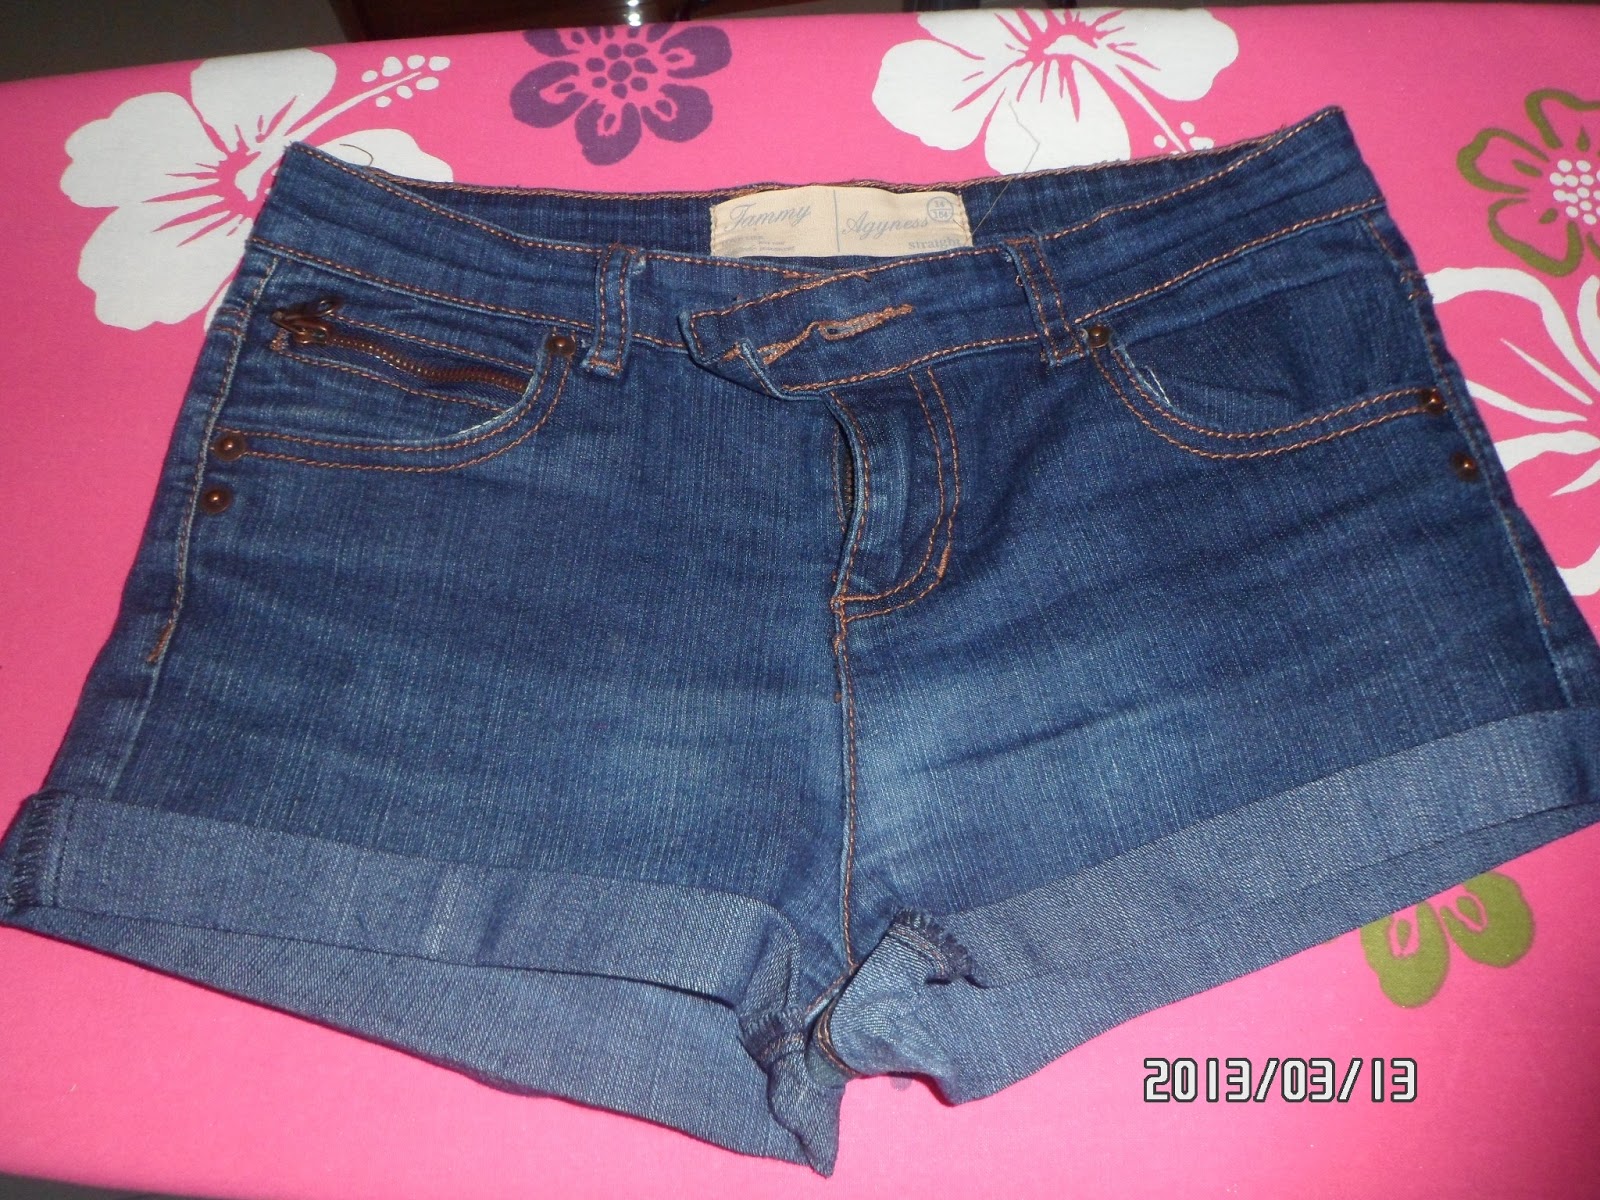 Beauty by a Geek: Cutting Jeans to shorts